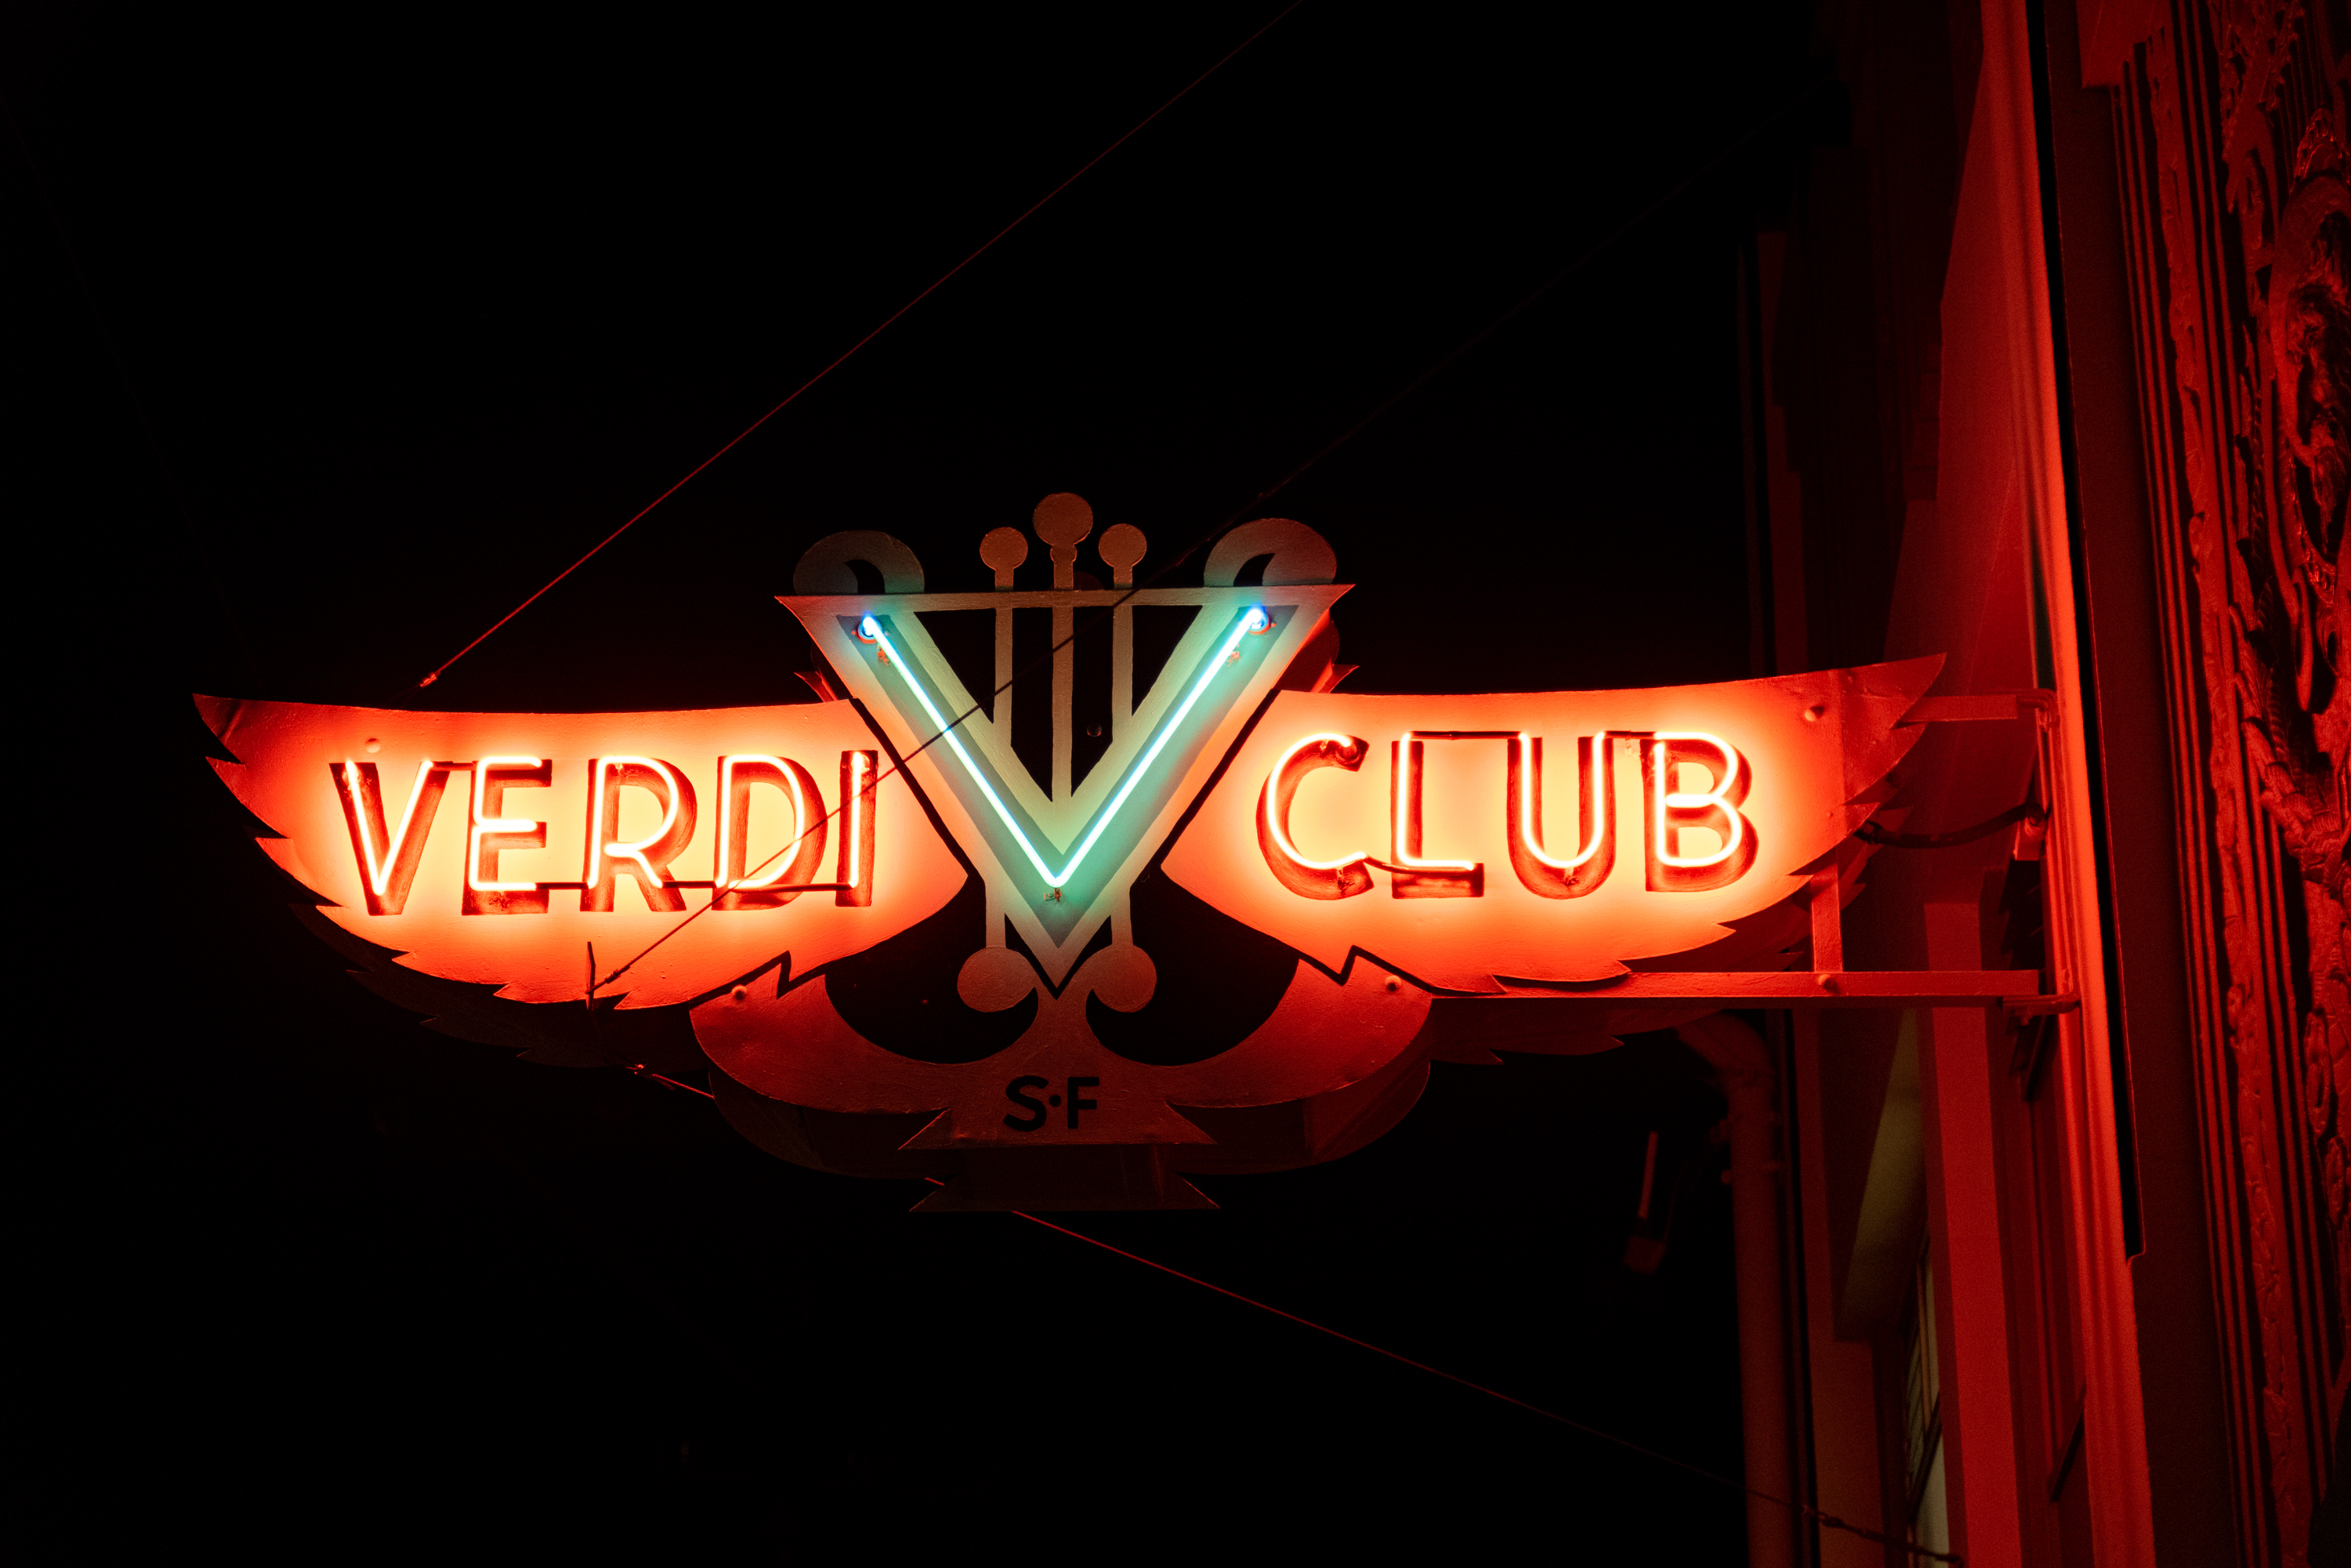 A red neon sign at night that reads &quot;VERDI CLUB&quot;